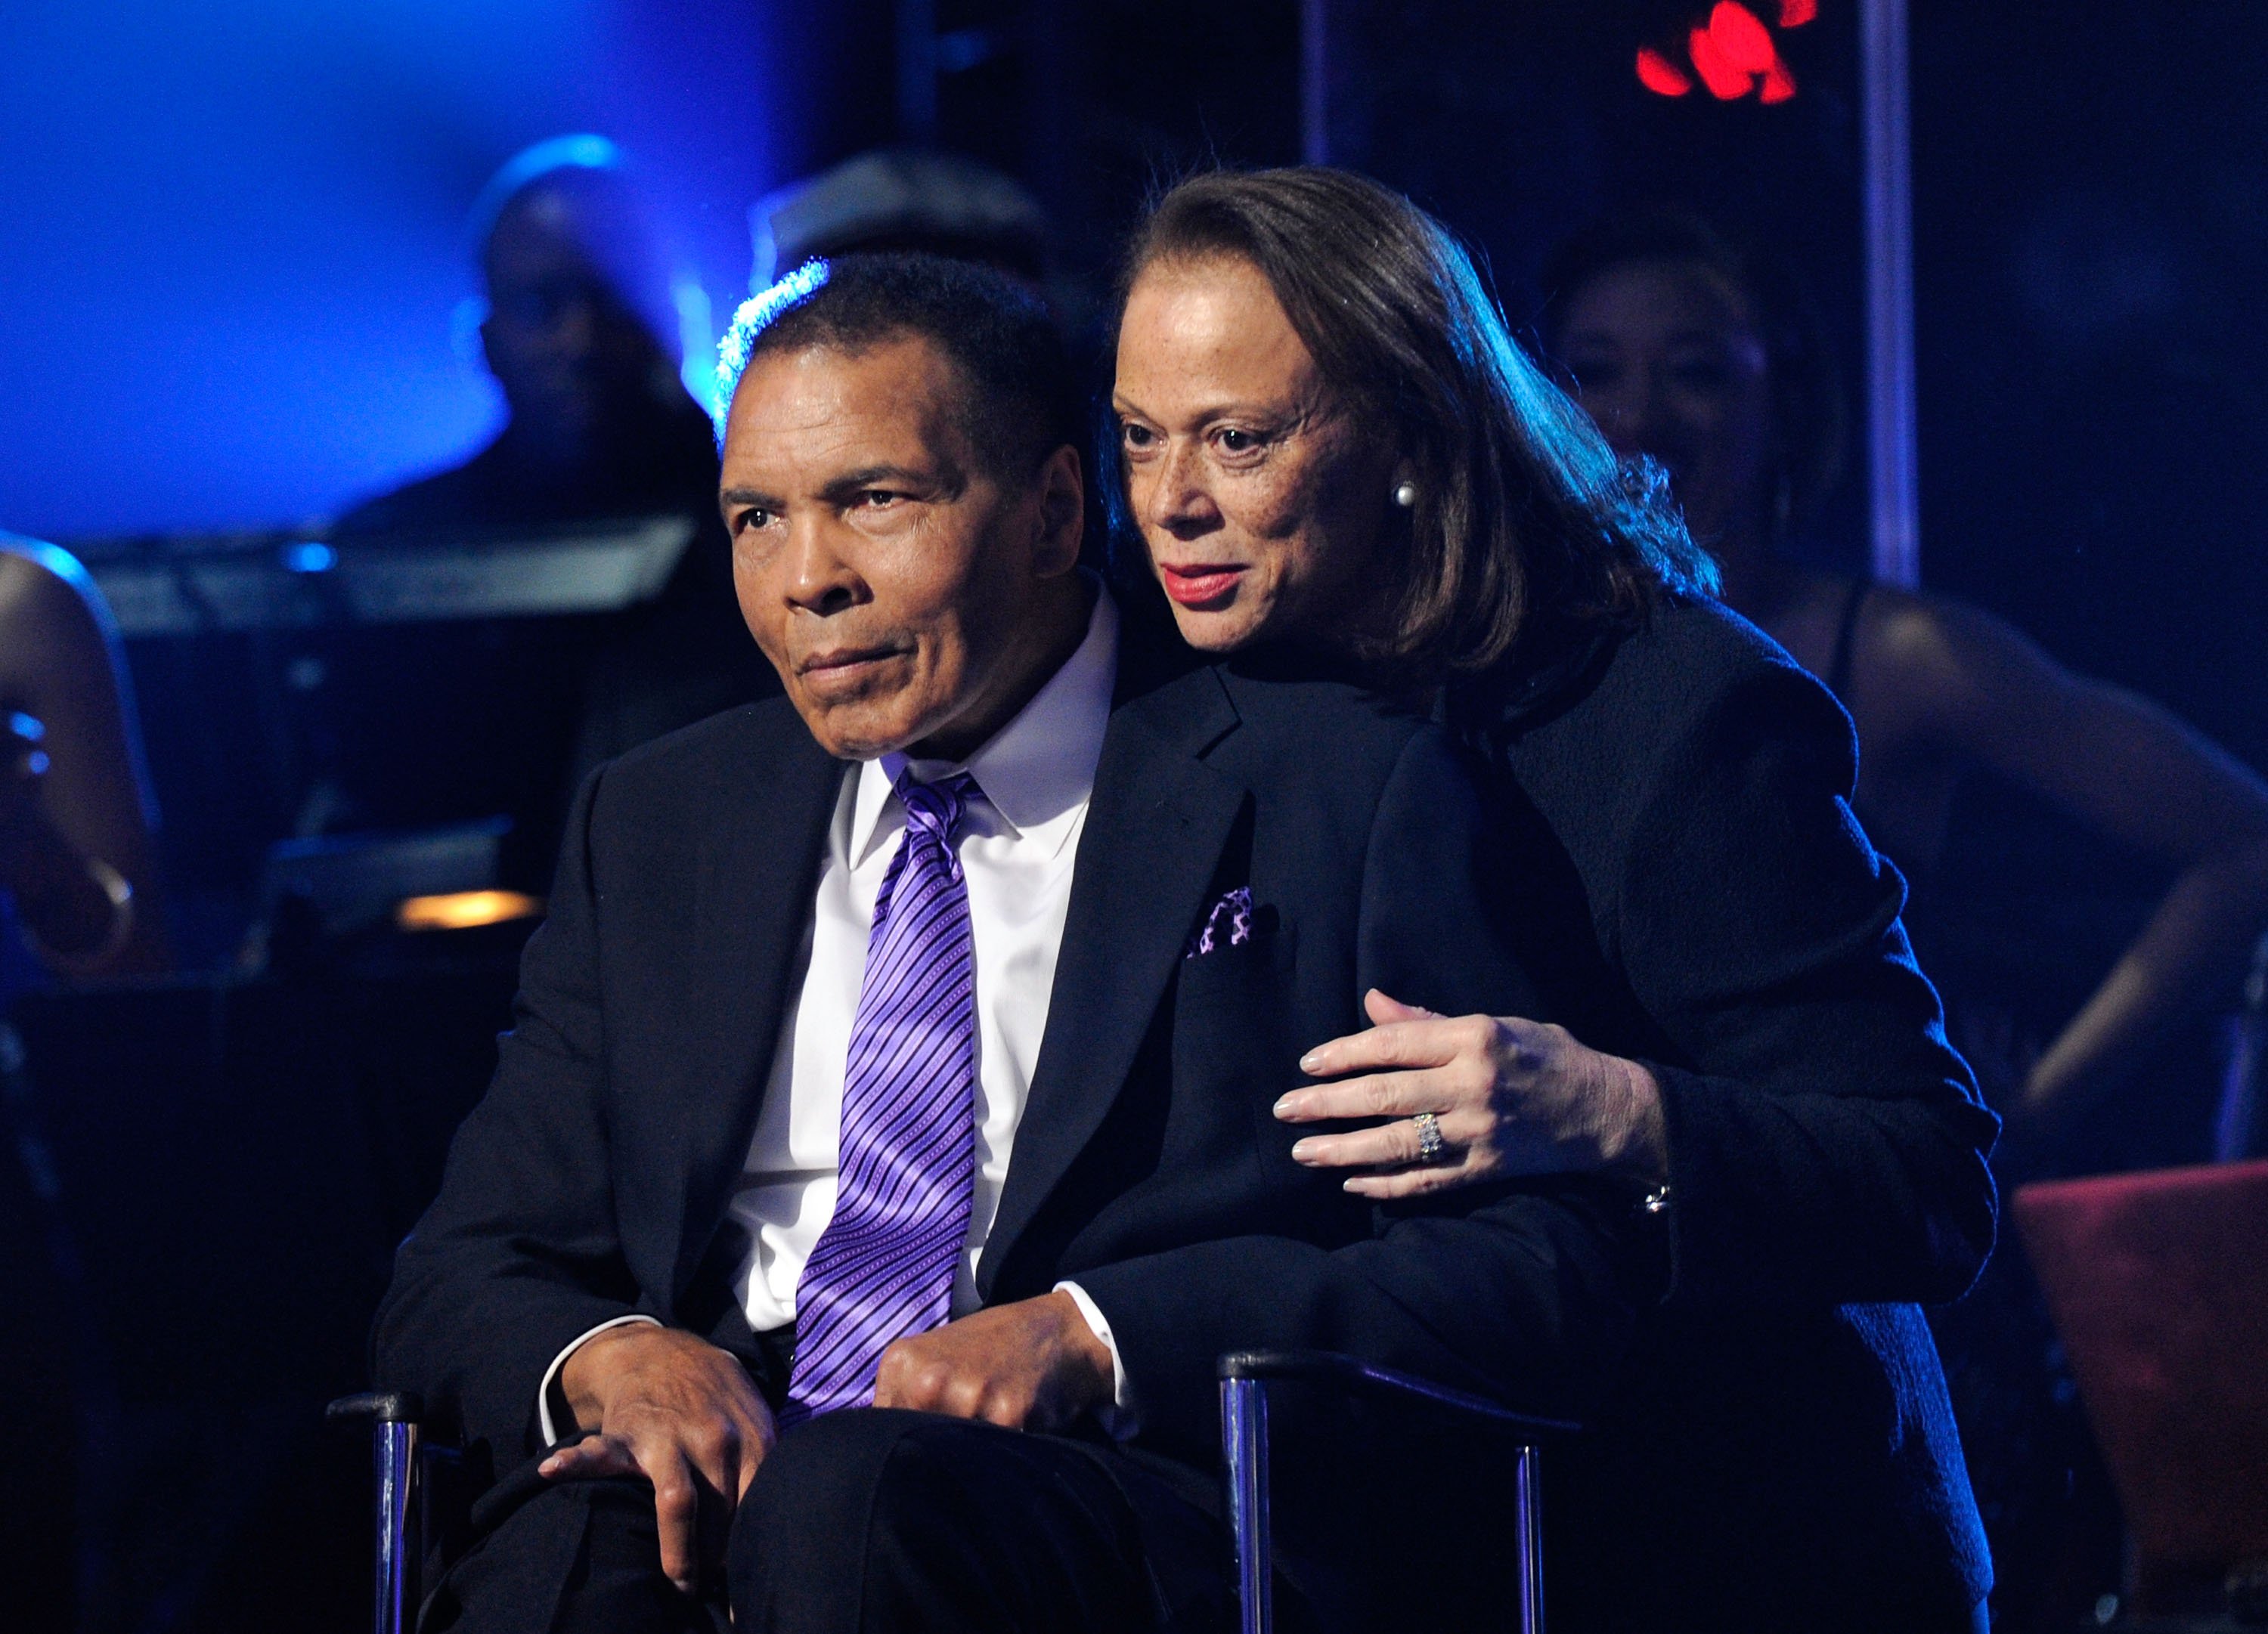 Muhammad Ali and wife Lonnie Ali celebrating Ali's 70th birthday at the MGM Grand Garden Arena on February 18, 2012 in Las Vegas, Nevada. | Source: Getty Images